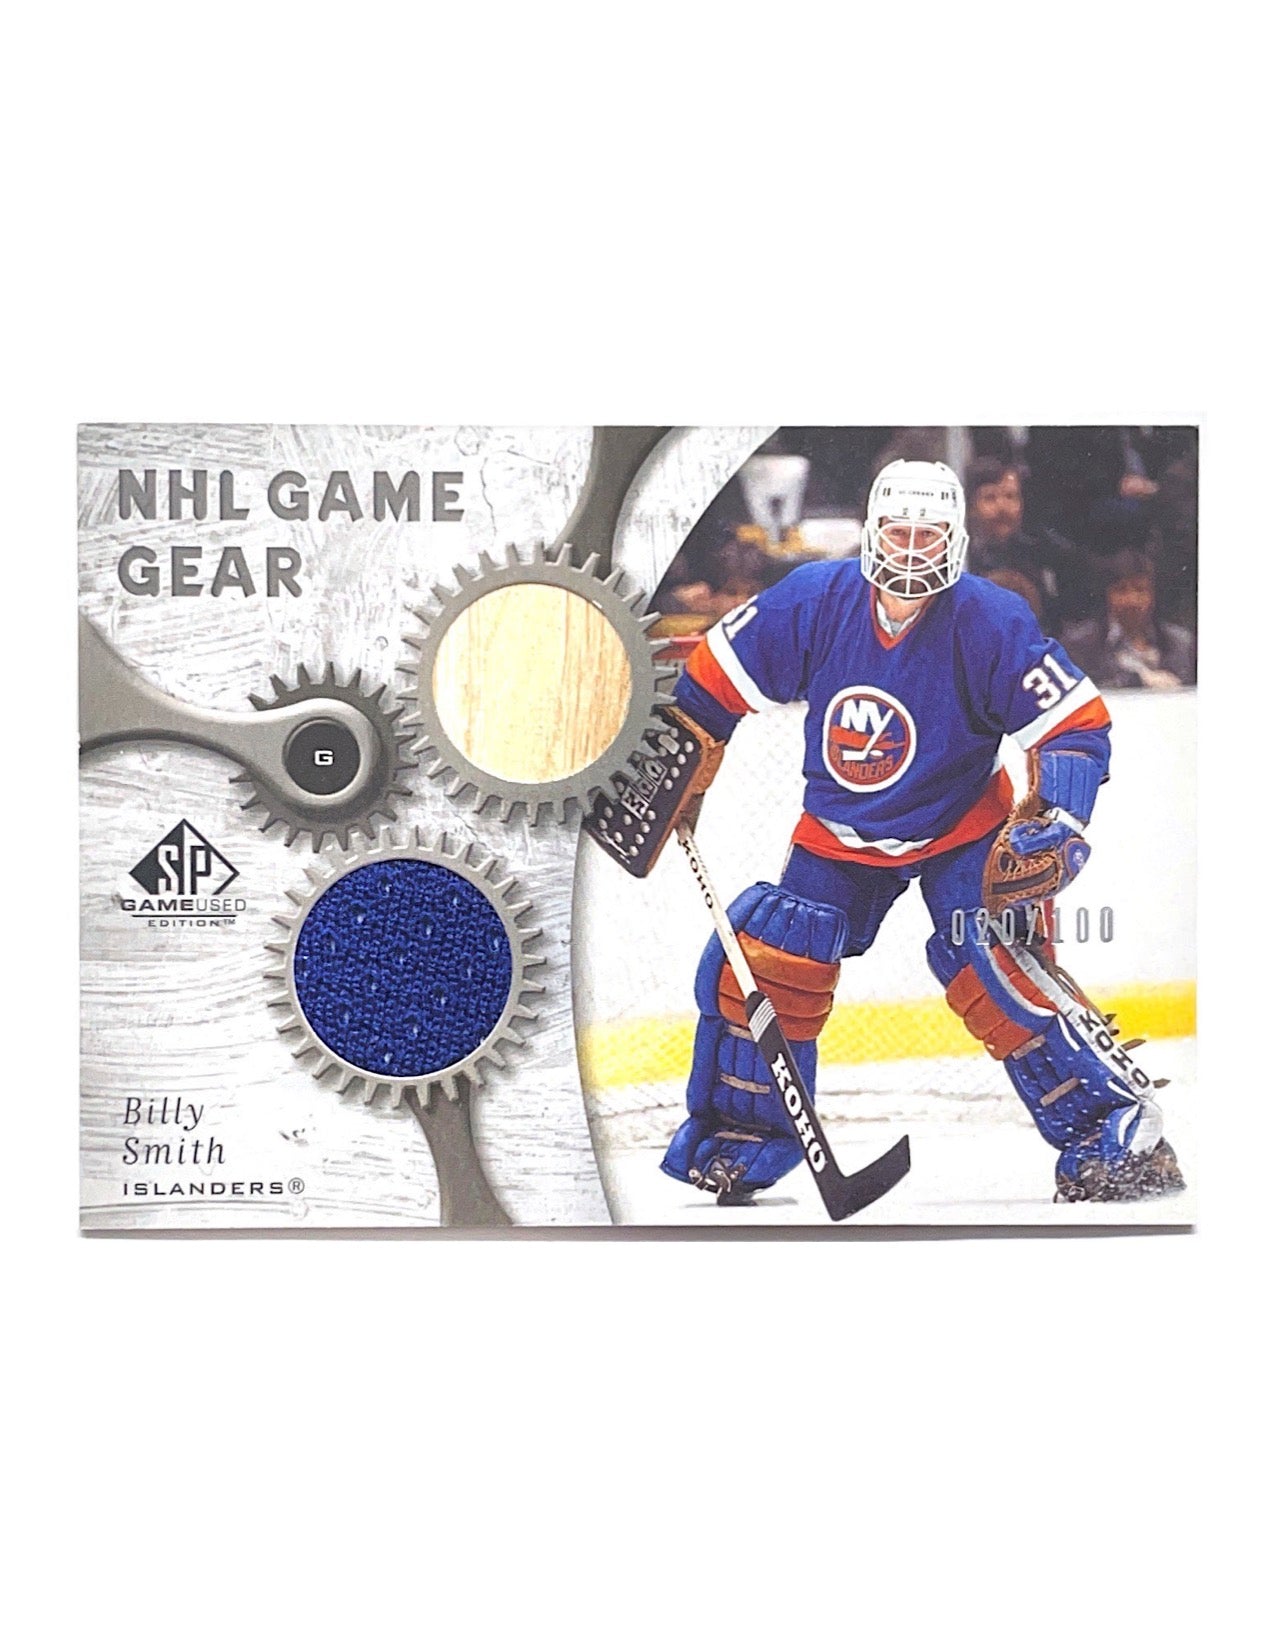 Billy Smith 2005-06 Upper Deck SP Game Used NHL Game Gear Jersey Stick #GG-BS - 020/100